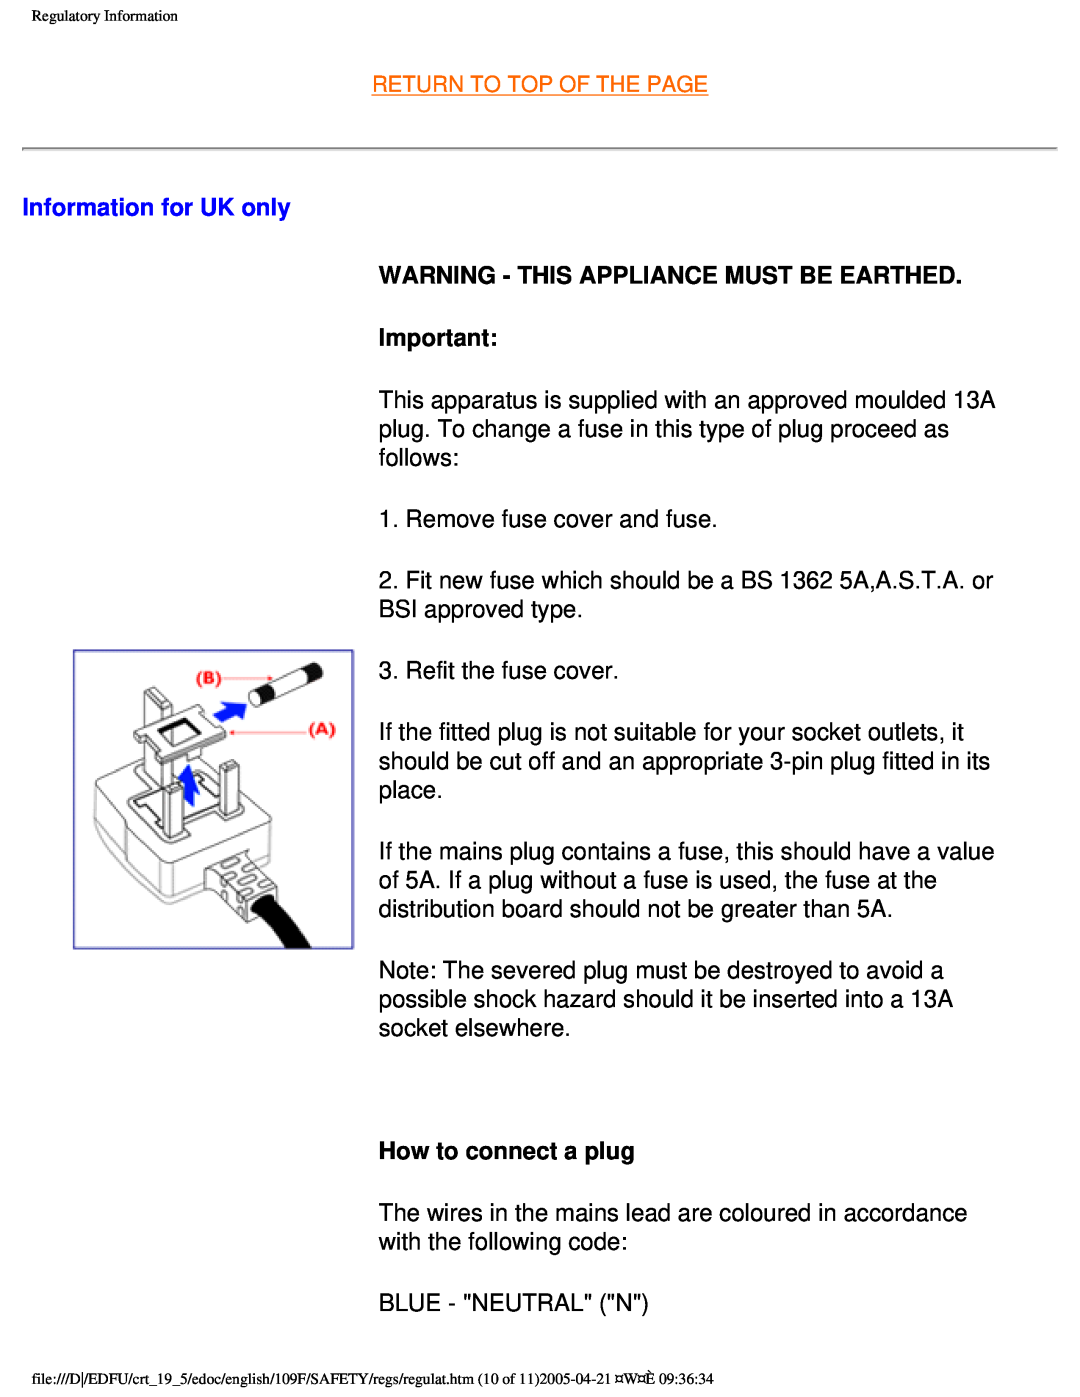 Philips 109F user manual Information for UK only, Warning - This Appliance Must Be Earthed, How to connect a plug 